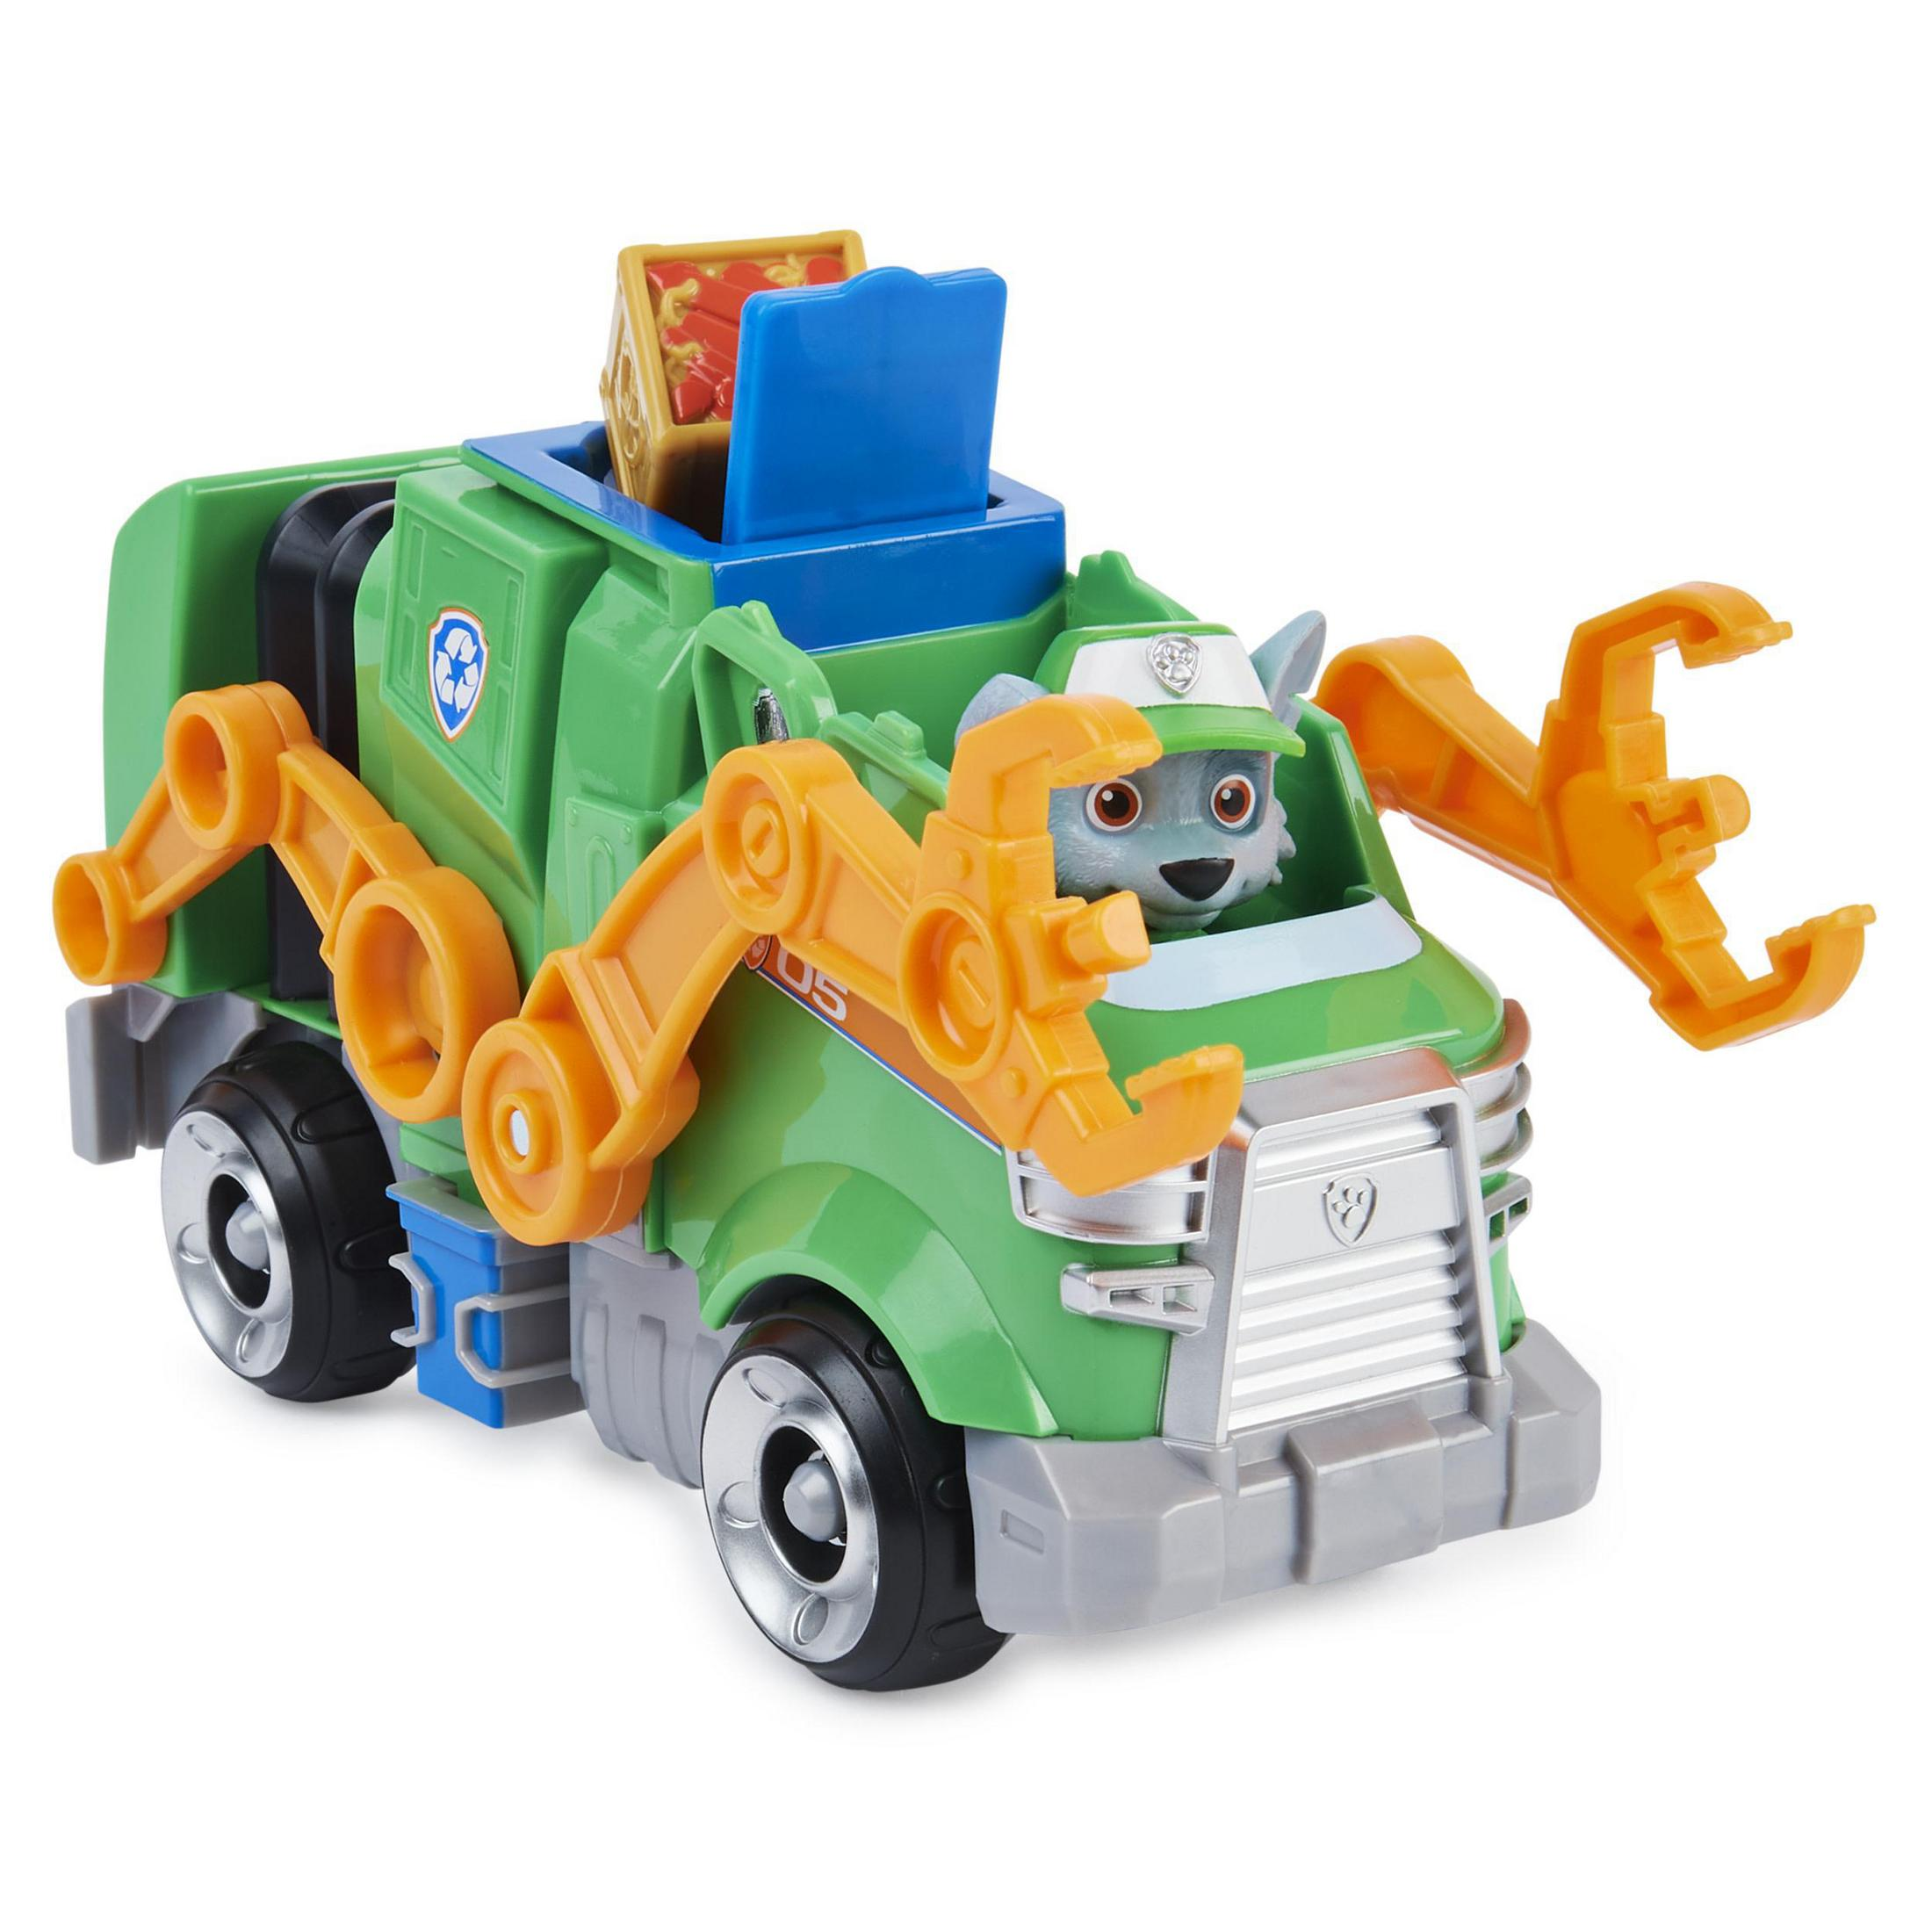 MOVIE Mehrfarbig 39882 MASTER Spielset VEHICLE BASIC SPIN PAW ROCKY